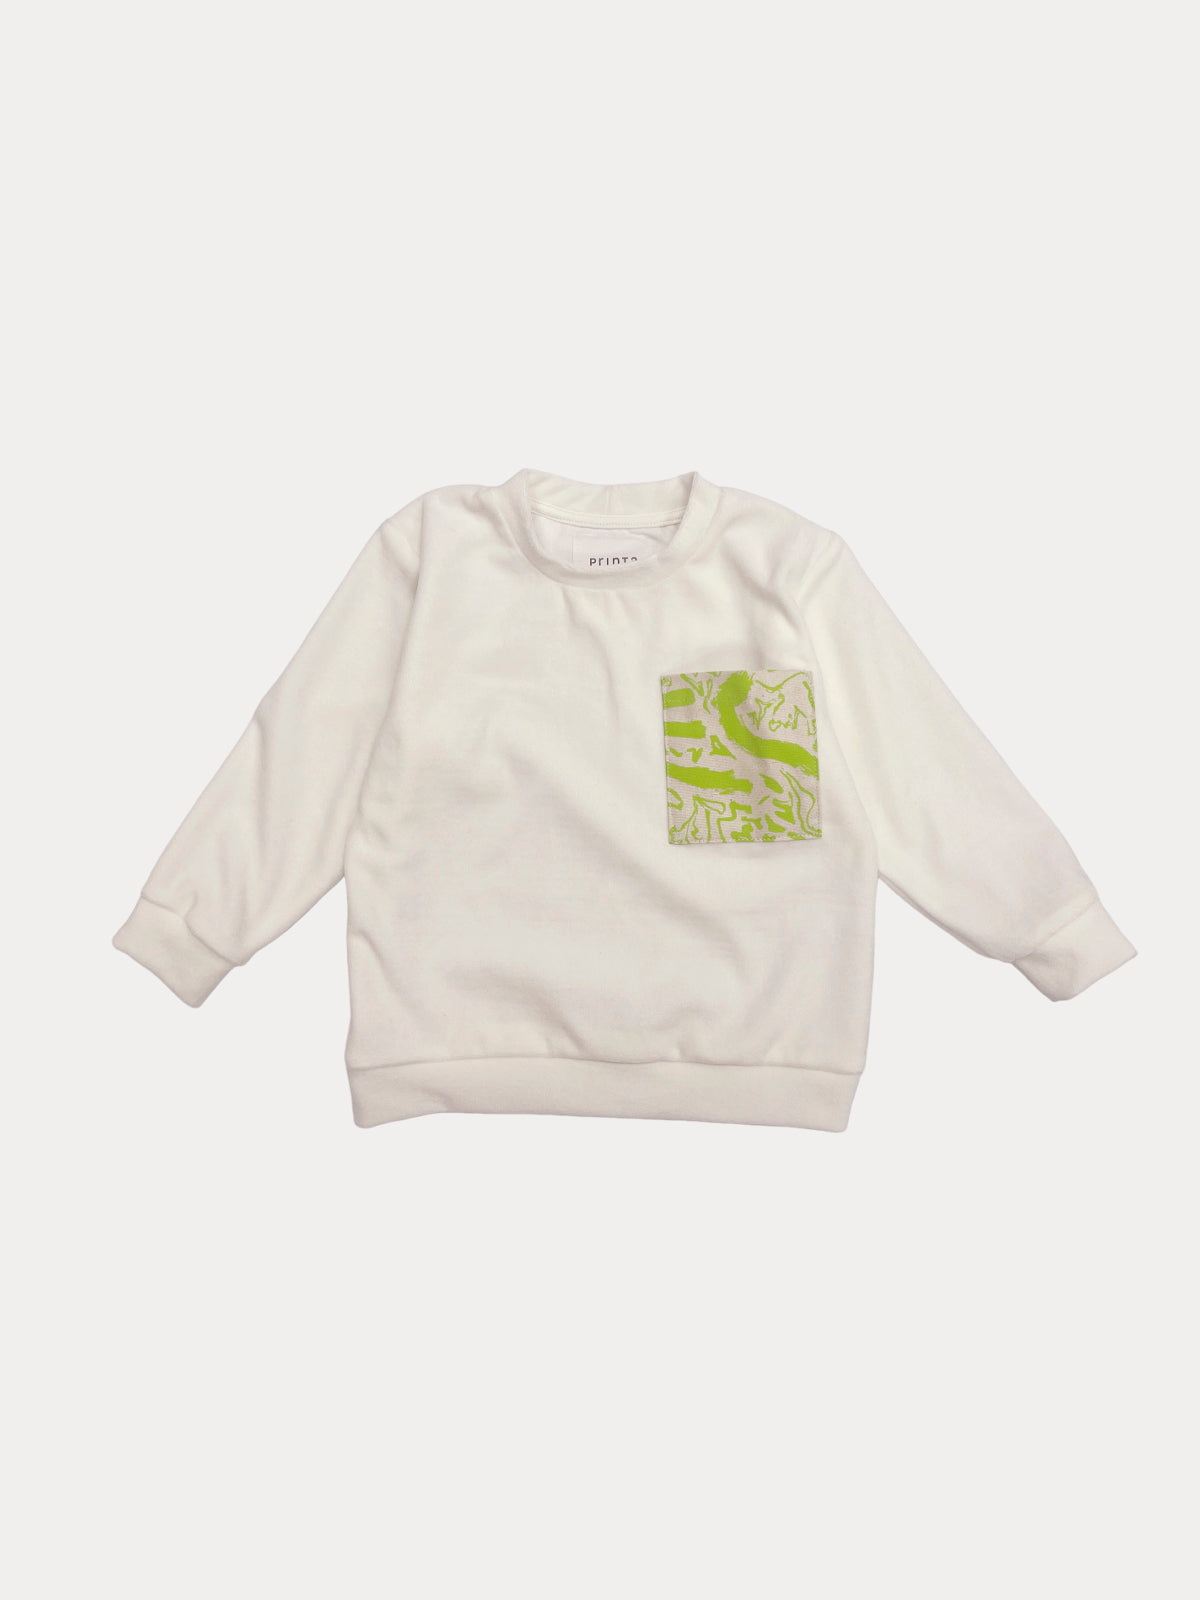 White children's sweater with pockets